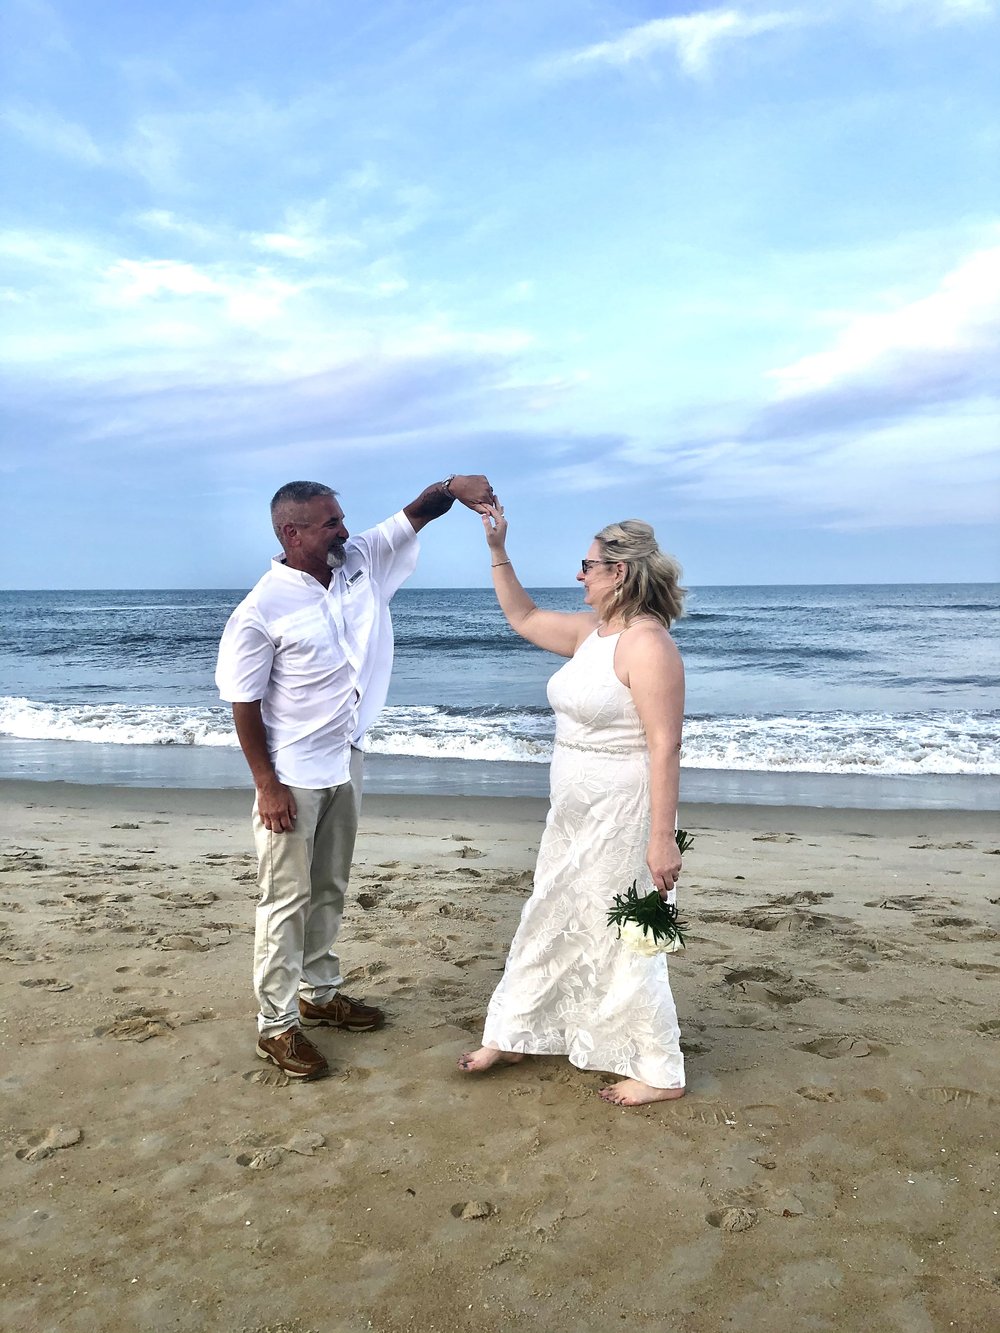 Rev. Jay Bowman . Outer Banks Wedding Officiant . Elopement Packages 21 .jpeg